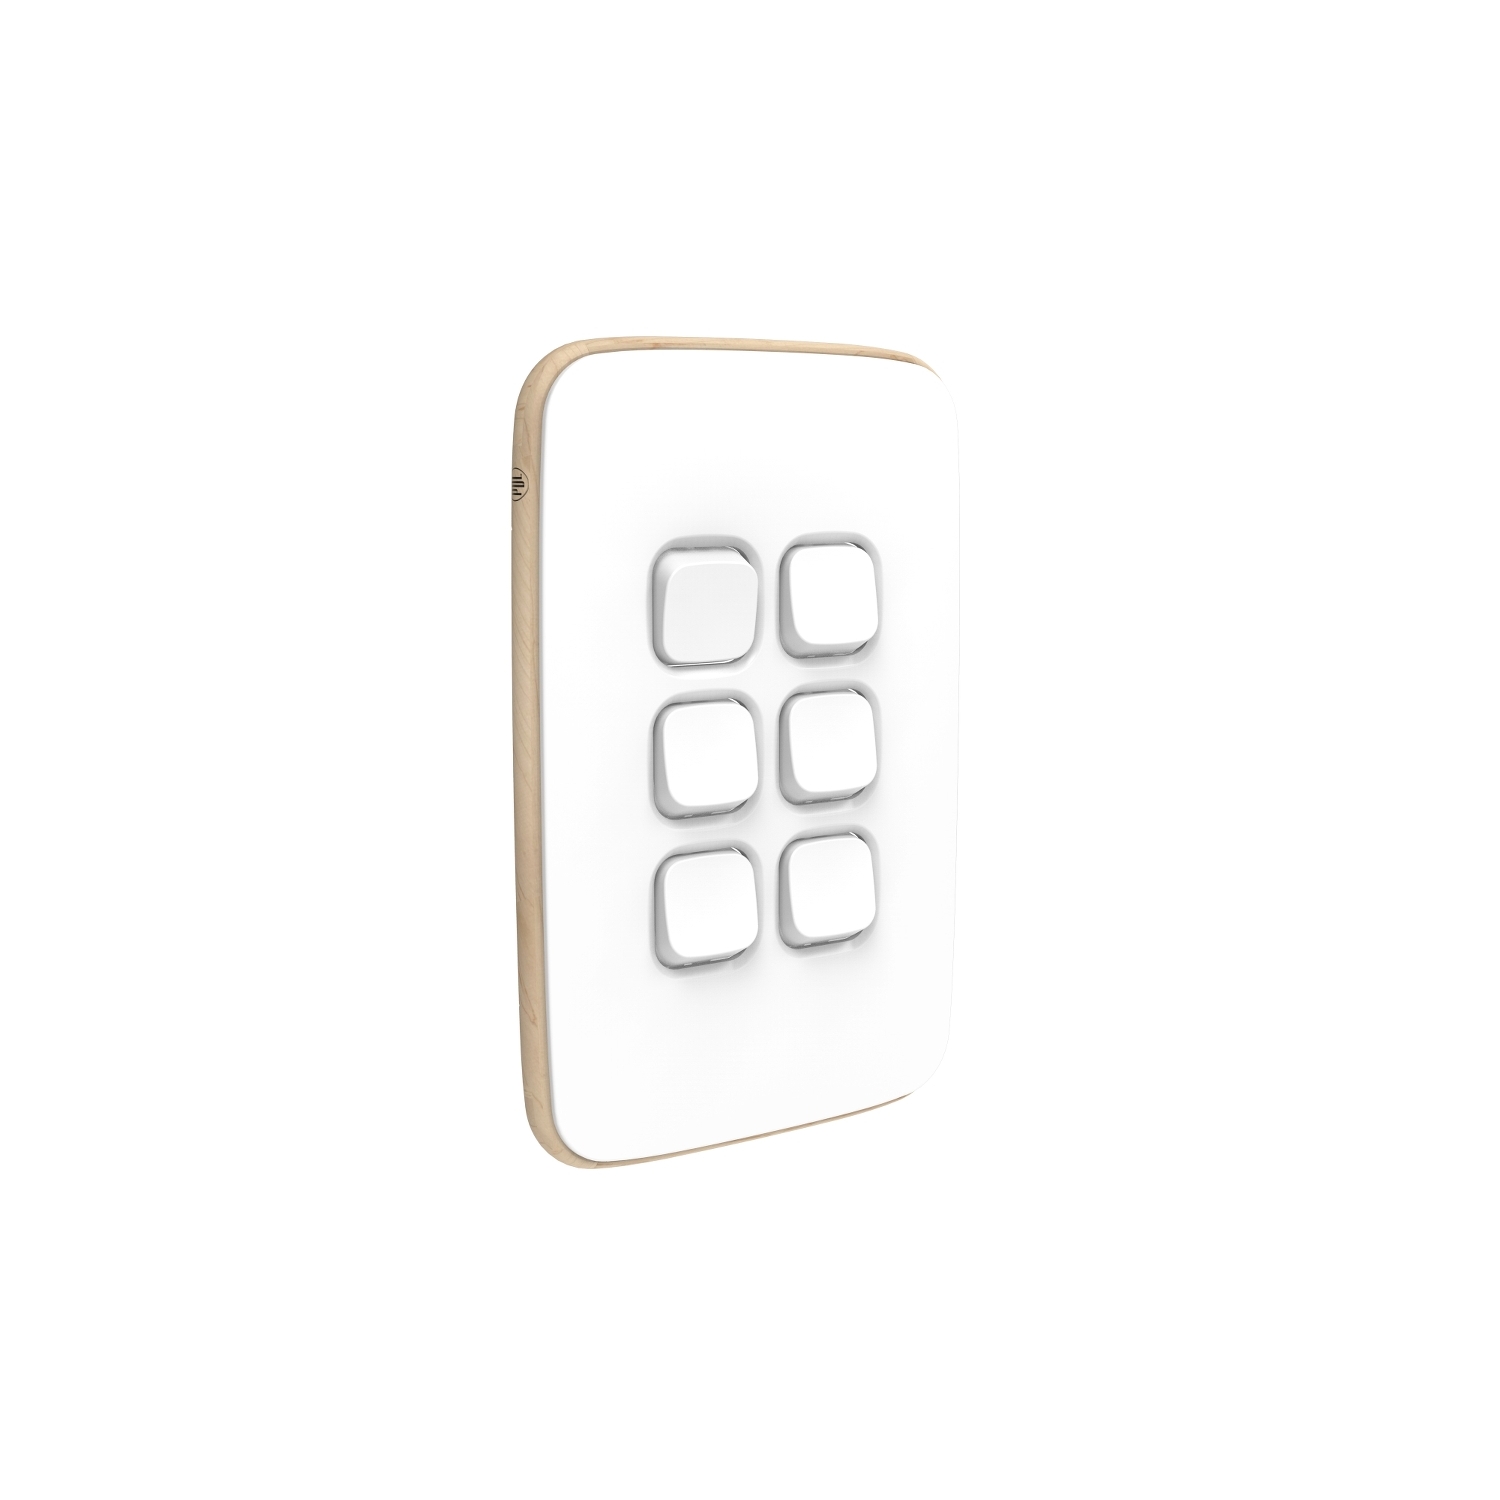 PDL Iconic Essence, cover frame, 6 switches, vertical - Arctic White